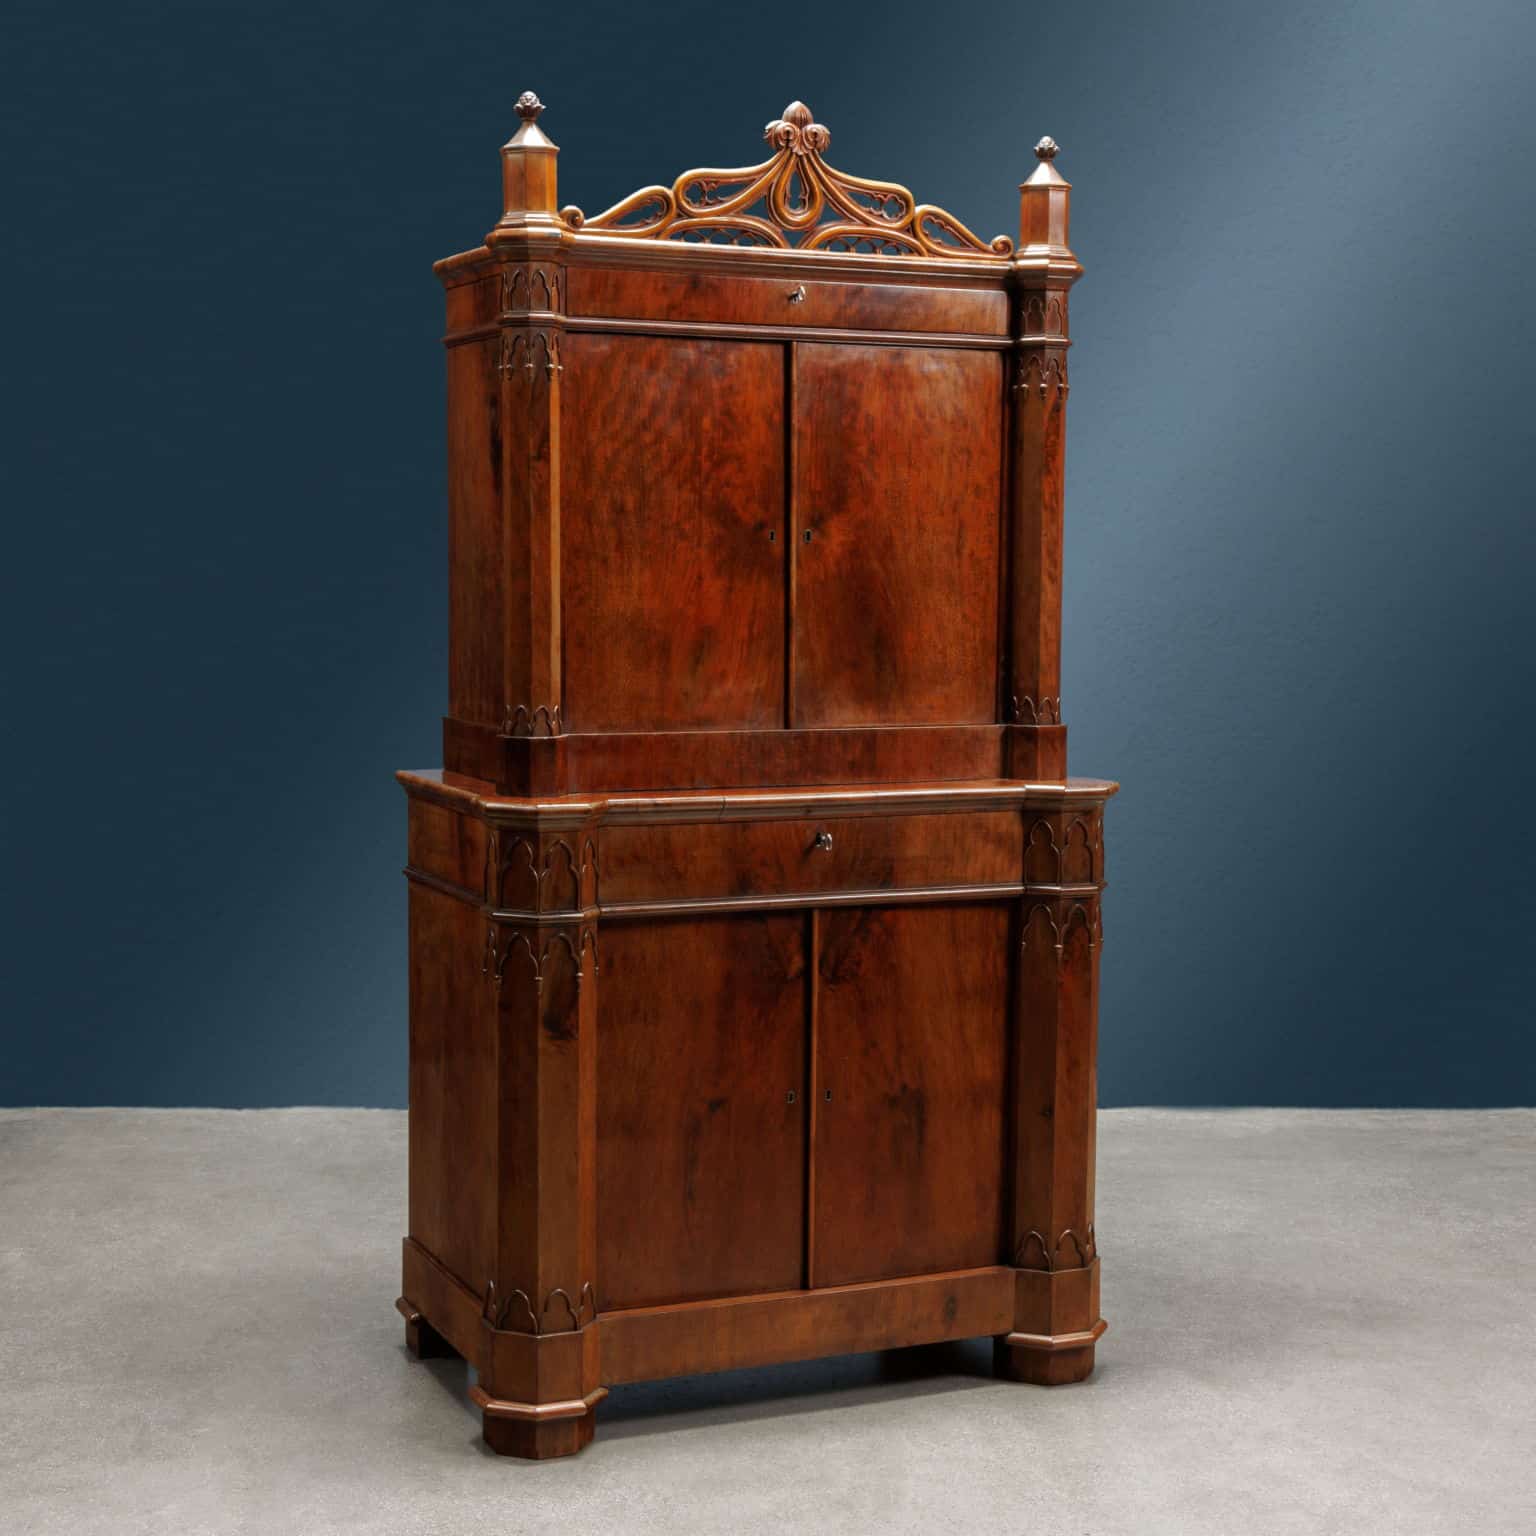 Coin cabinet. Piedmont, second quarter of the 19th century